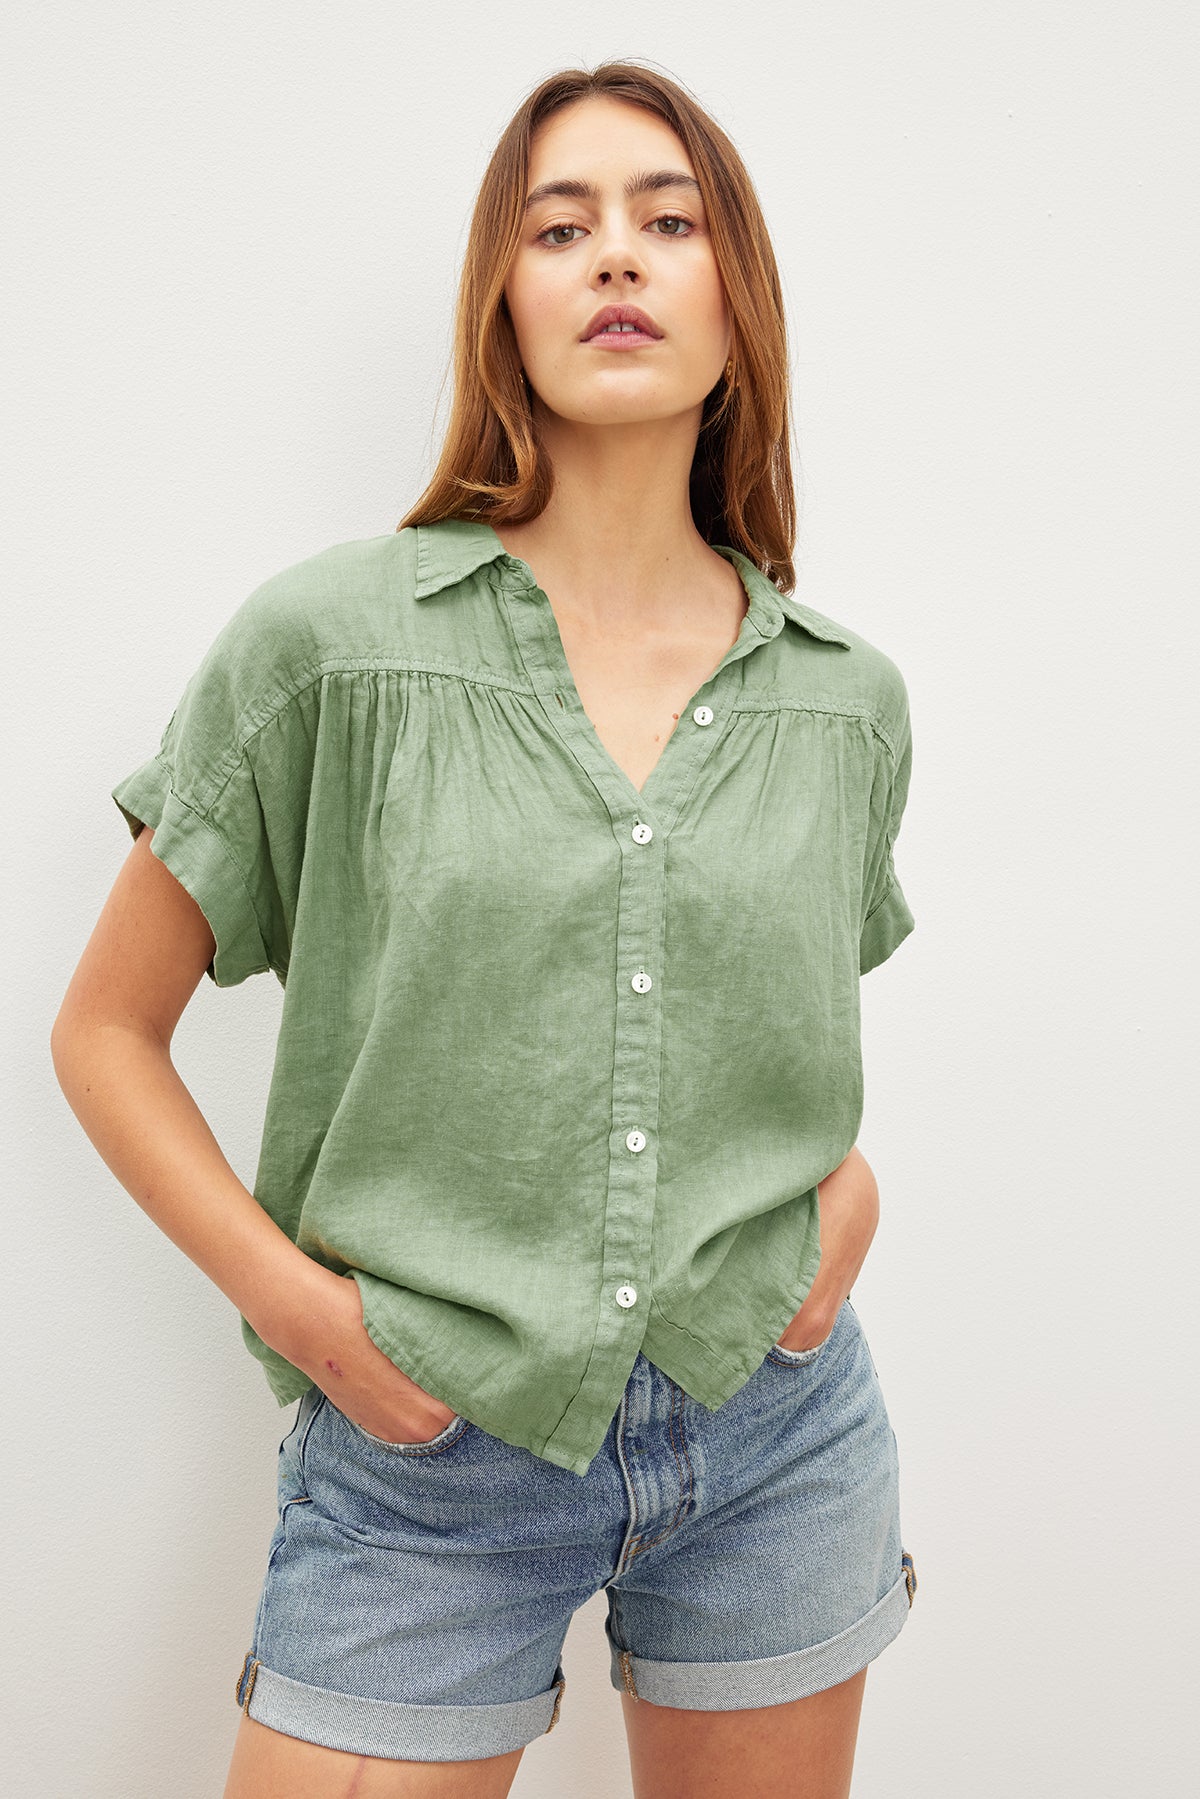 The model is wearing a Velvet by Graham & Spencer ARIA LINEN BUTTON FRONT TOP in sage green and denim shorts, exuding timeless appeal.-35955414991041